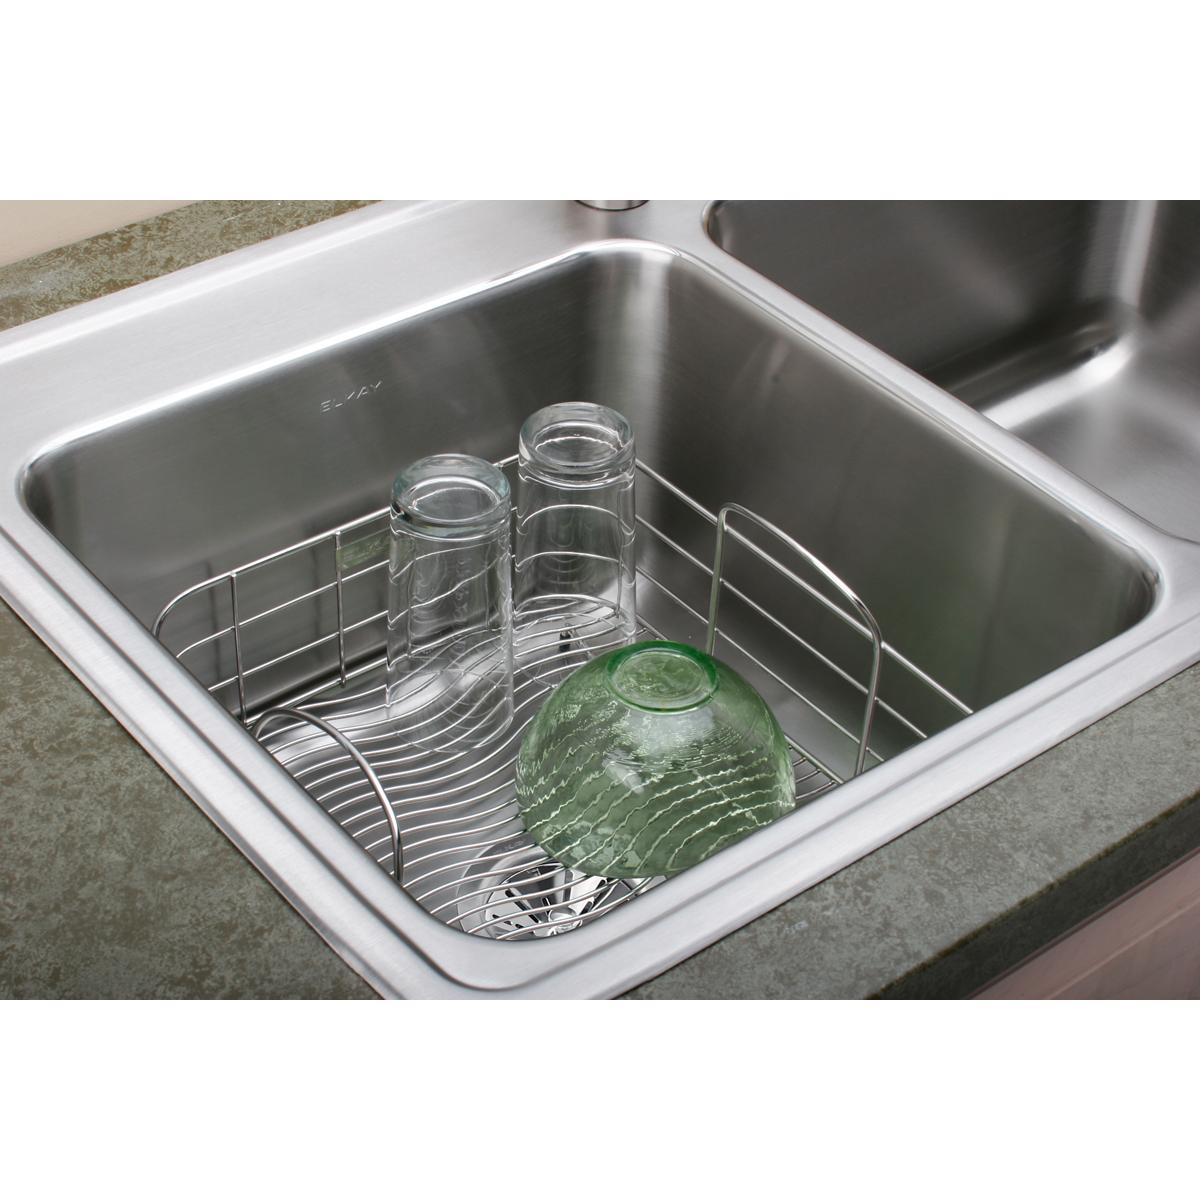 polished stainless steel rinsing basket